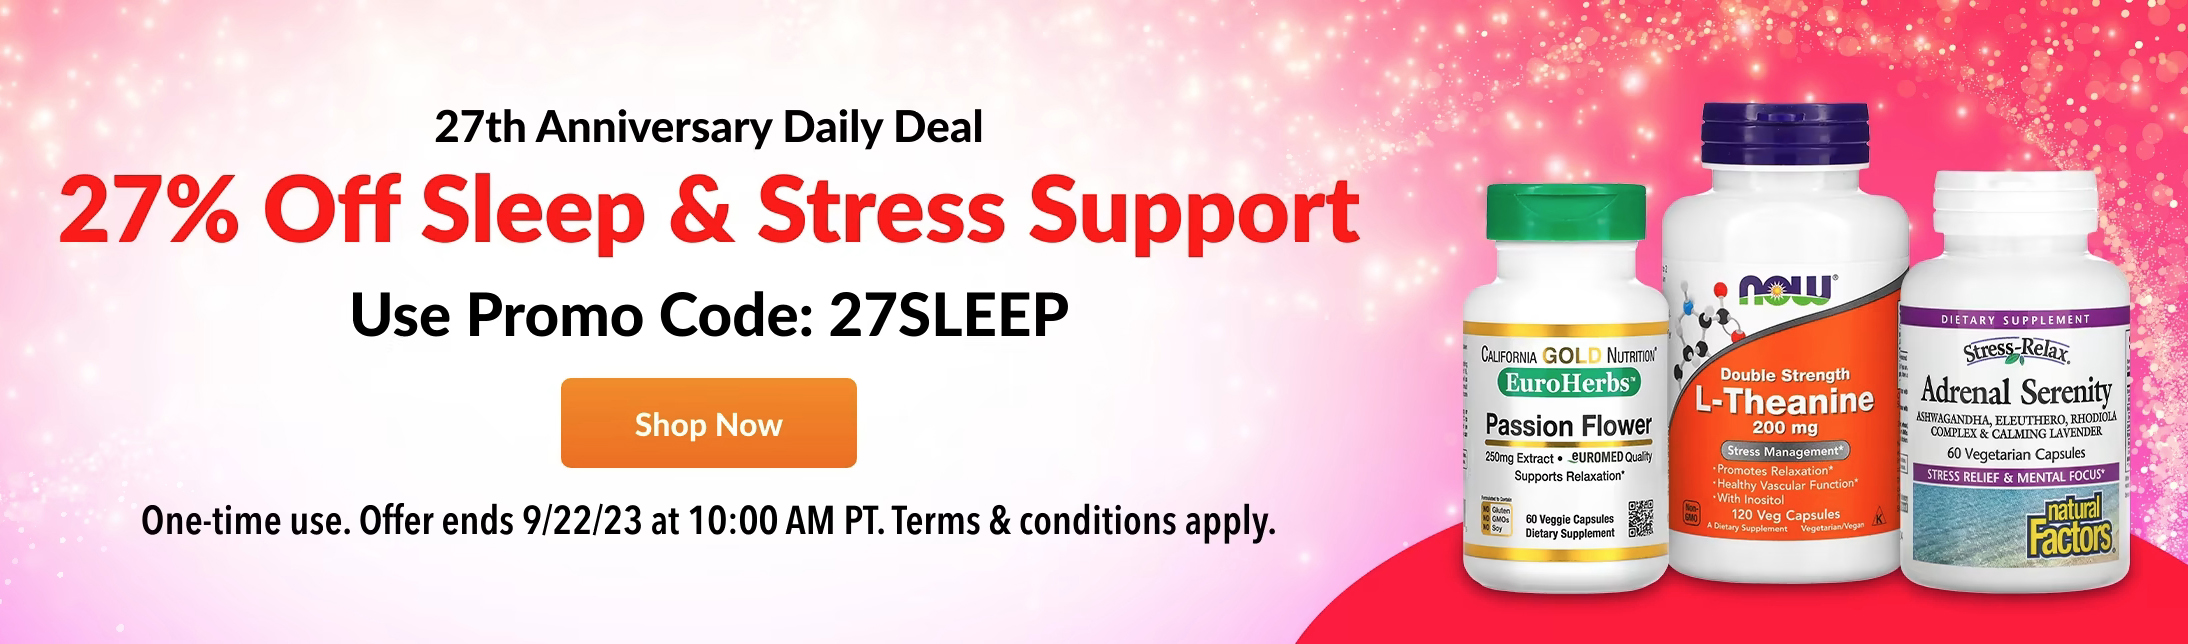 27% off Sleep & Stress Support at iHerb